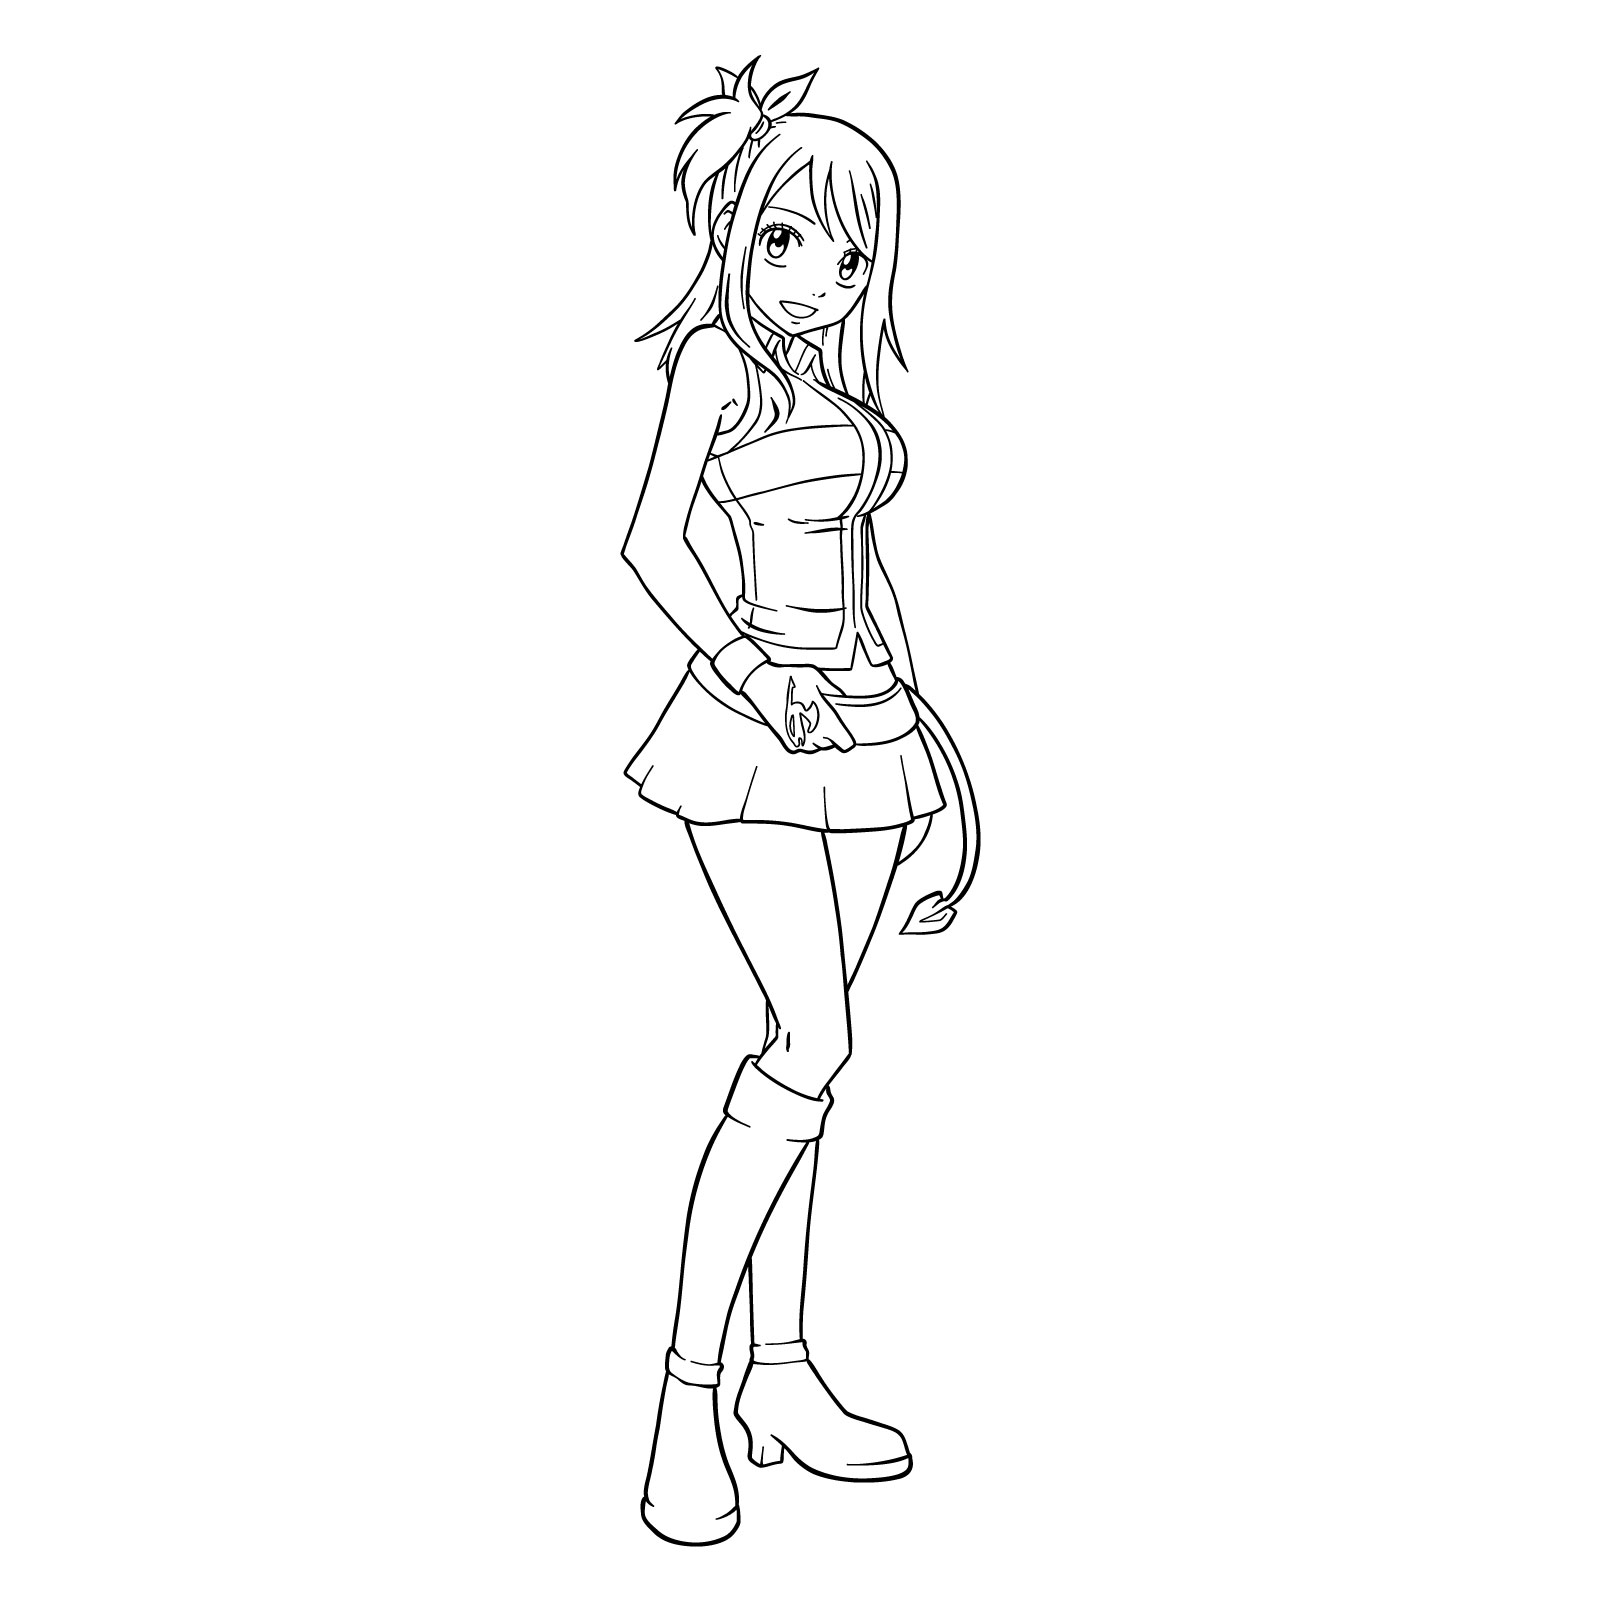 How to draw Lucy Heartfilia from Fairy Tail - final step